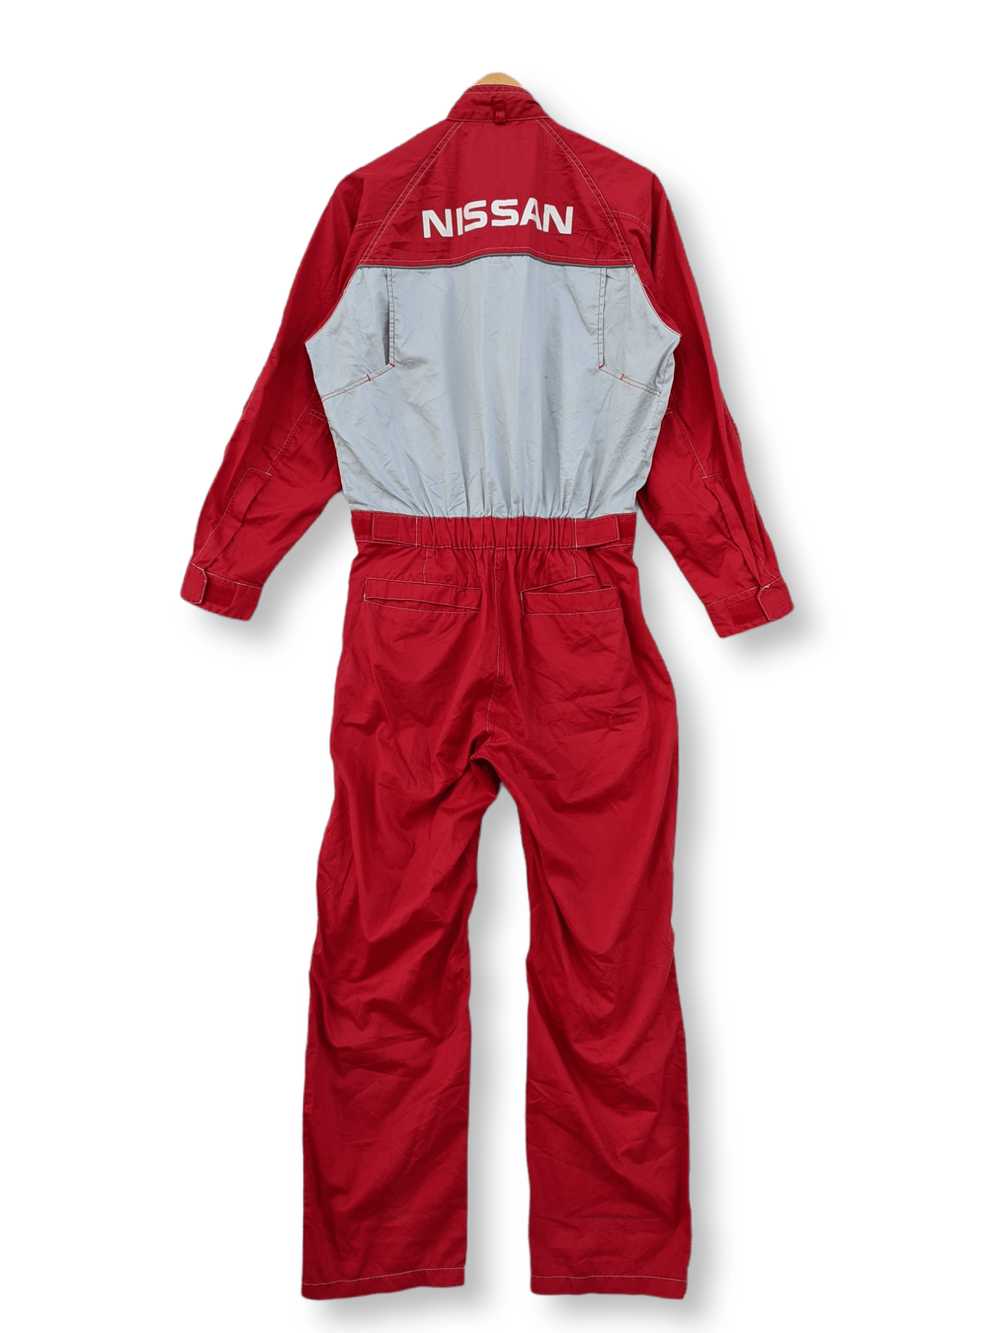 Gear For Sports × Racing Nissan Racing Worker Ove… - image 1